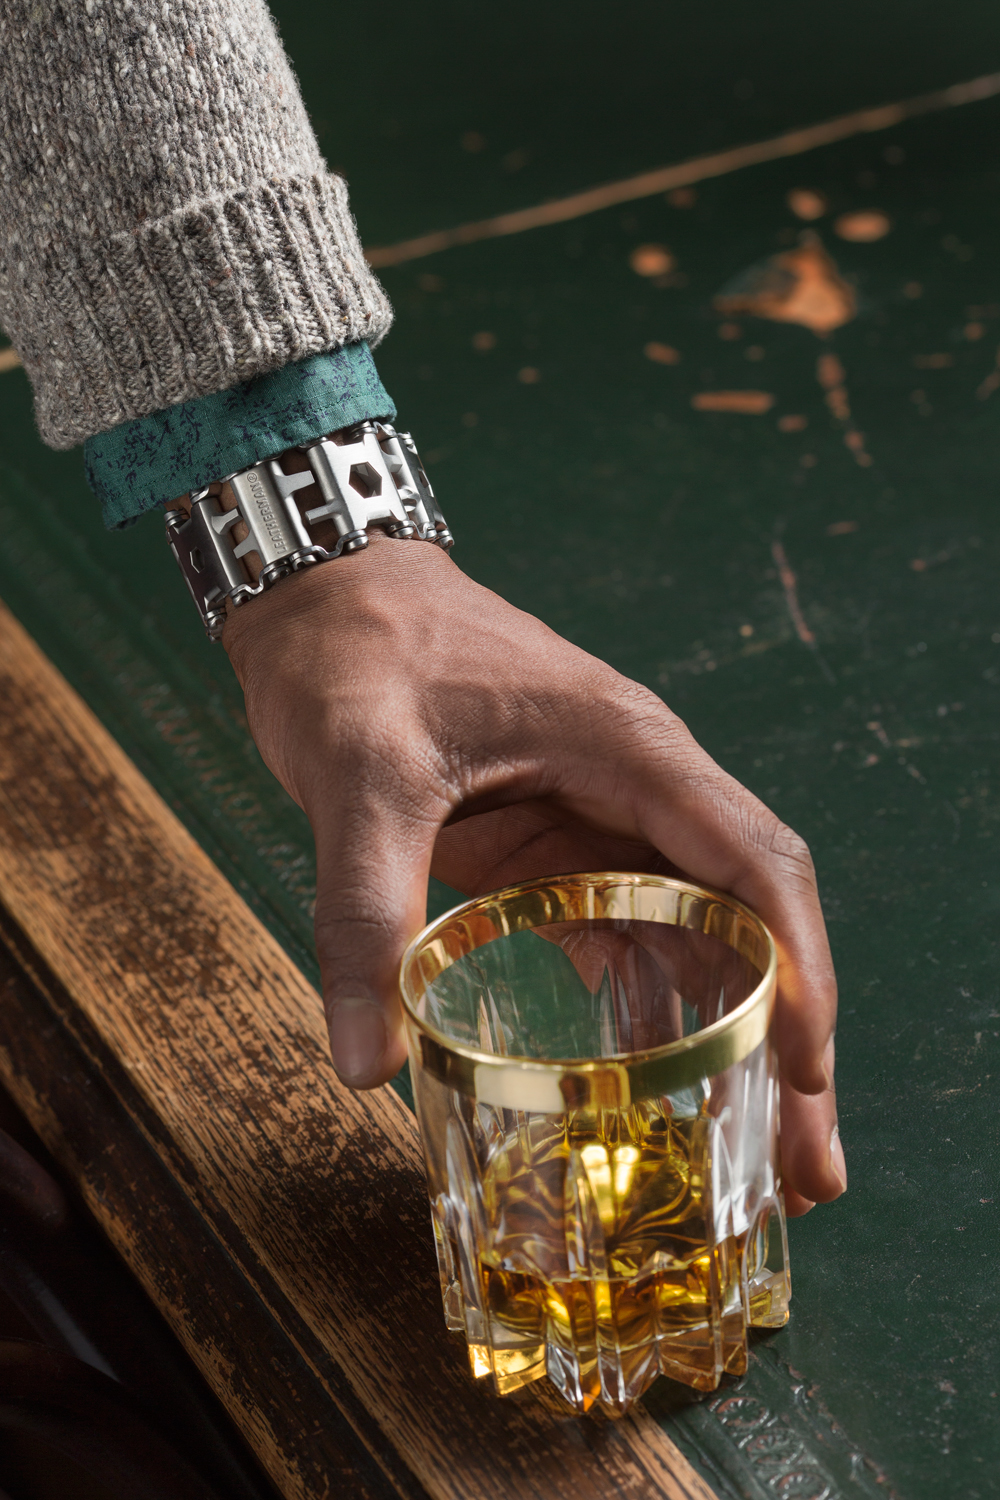 Arm wearing Leatherman tread tool bracelet reaching for cocktail drink on table